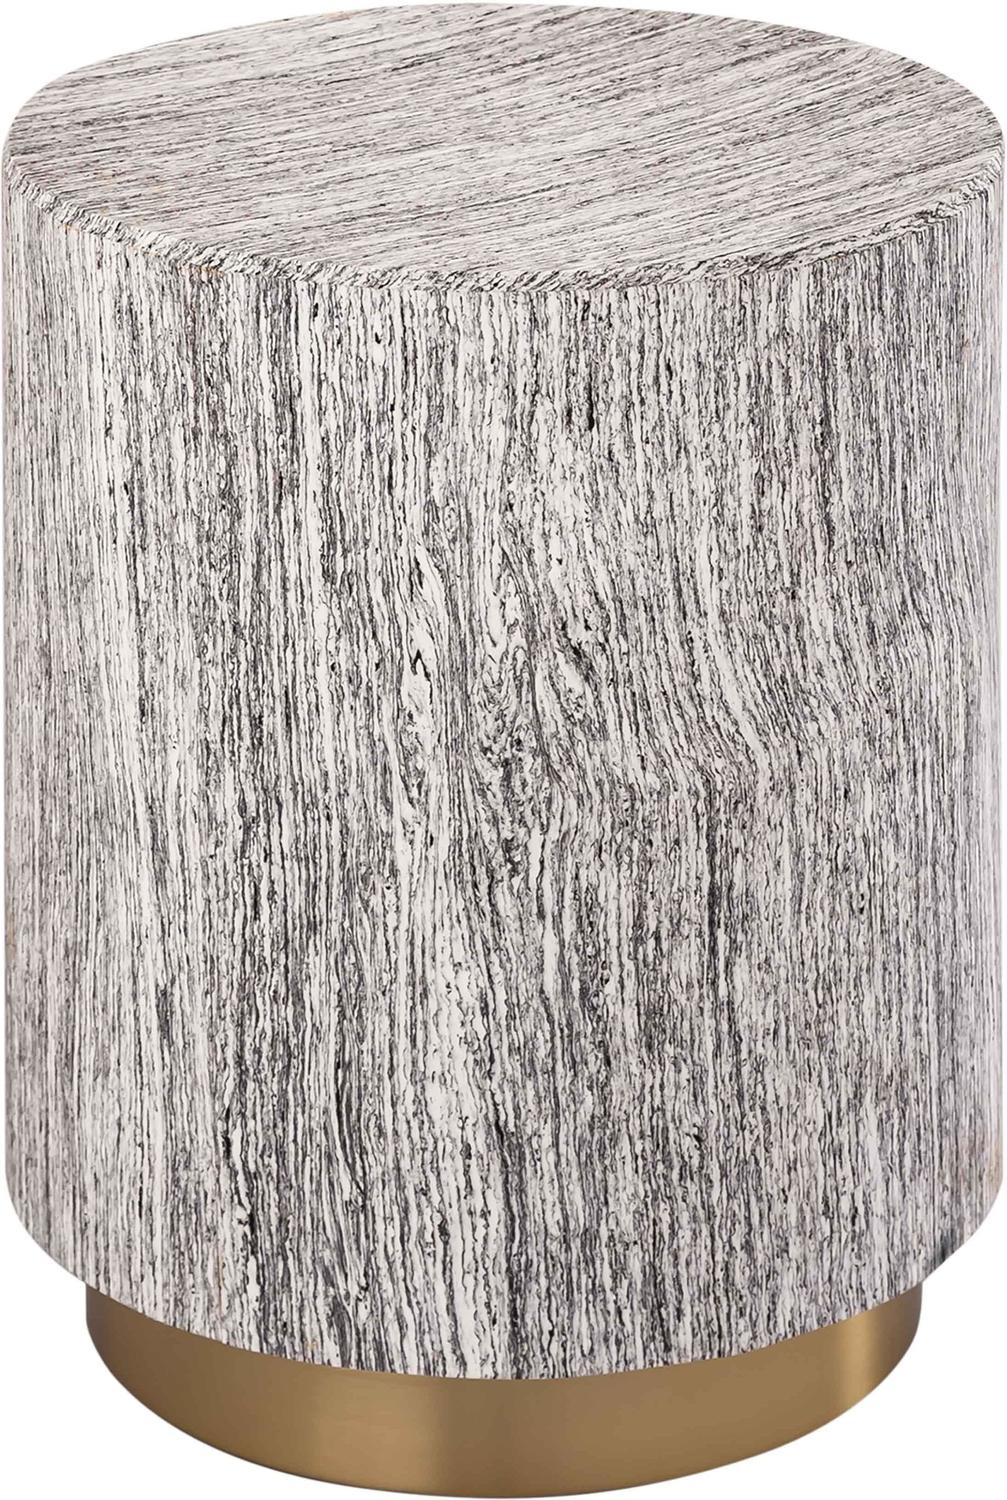 Tov Furniture Side Tables Accent Tables Distressed White